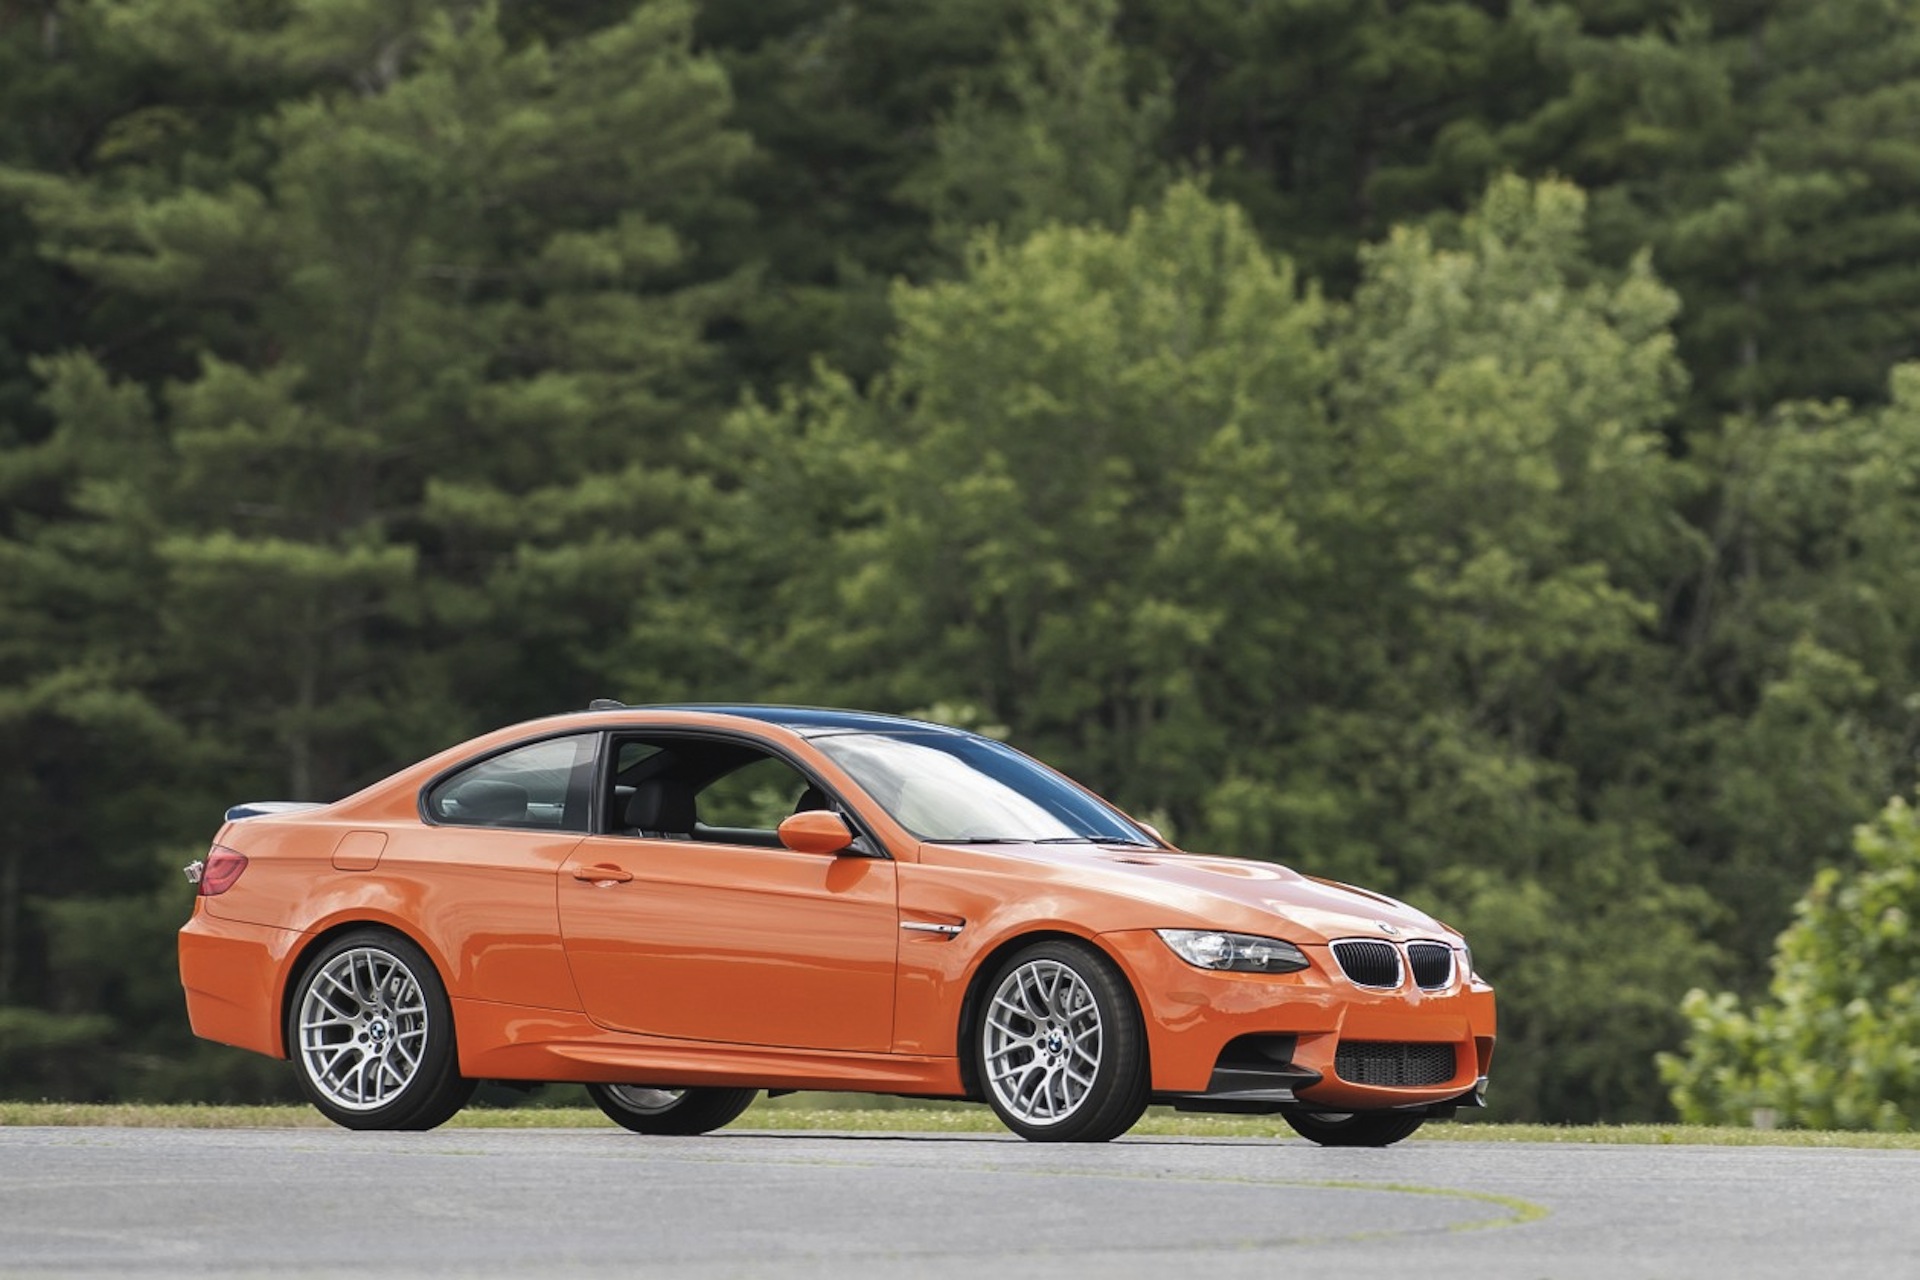 The BMW M3 Lime Rock Park Edition Left Me Wanting More